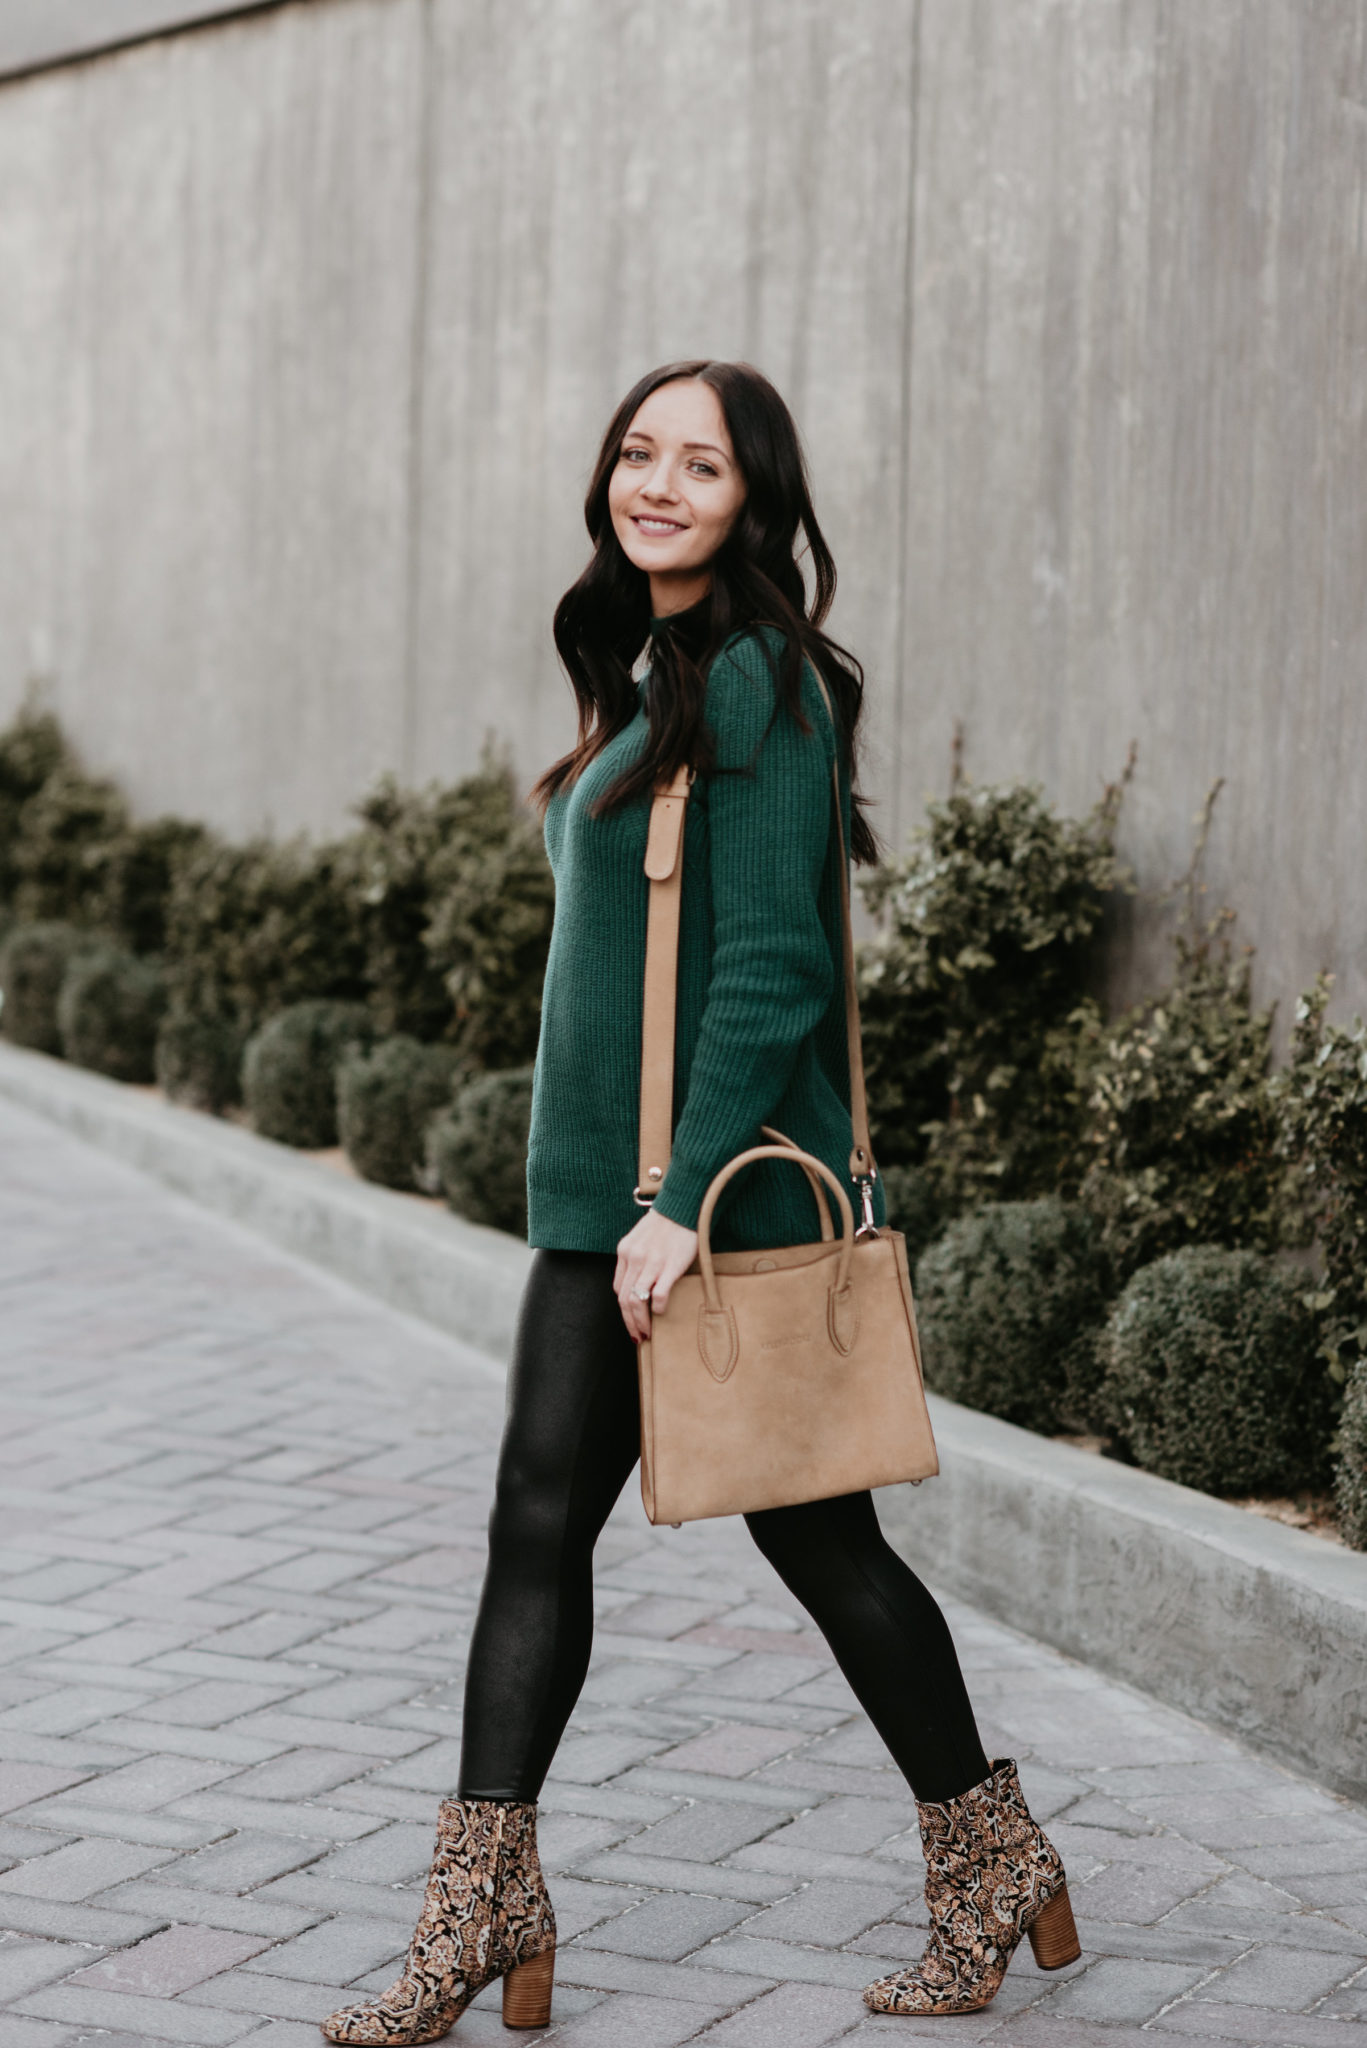 printed booties with black faux leather leggings and sweater for an easy everyday outfit - My Favorite Winter Sweaters All Under $50 by popular Las Vegas style blogger Outfits & Outings